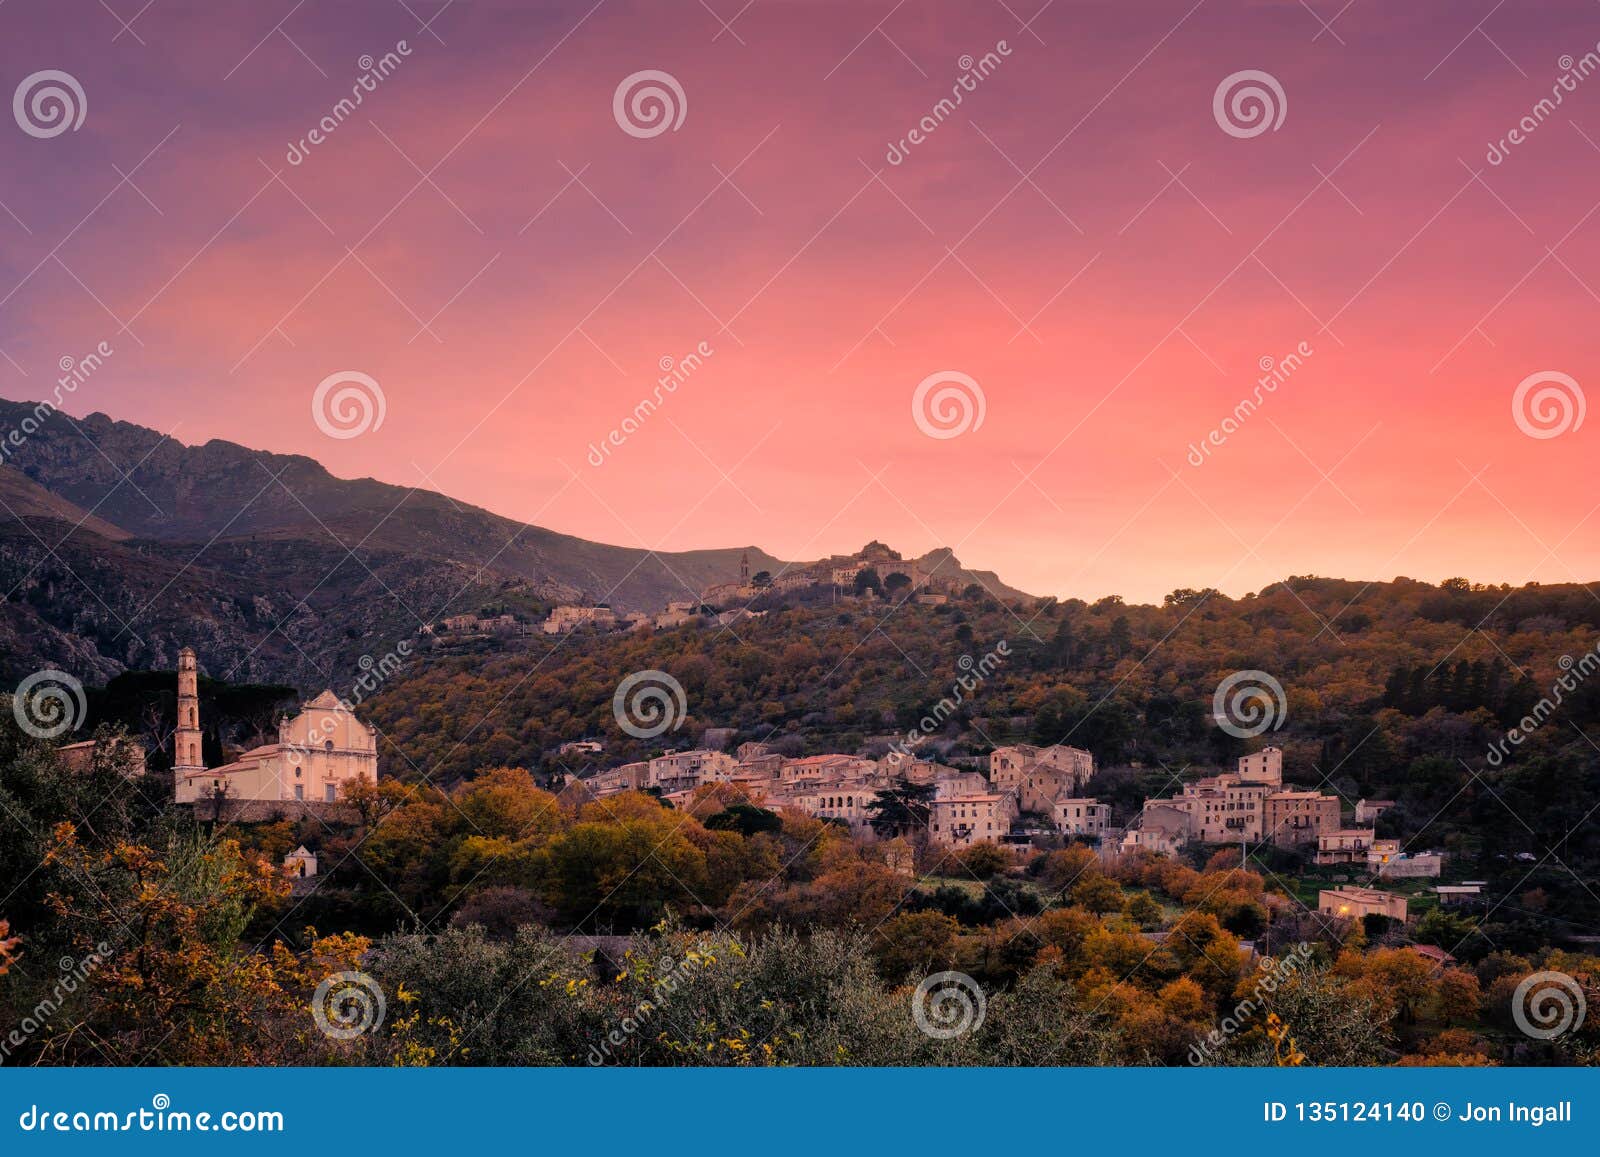 sunset over mountain villages in corsica